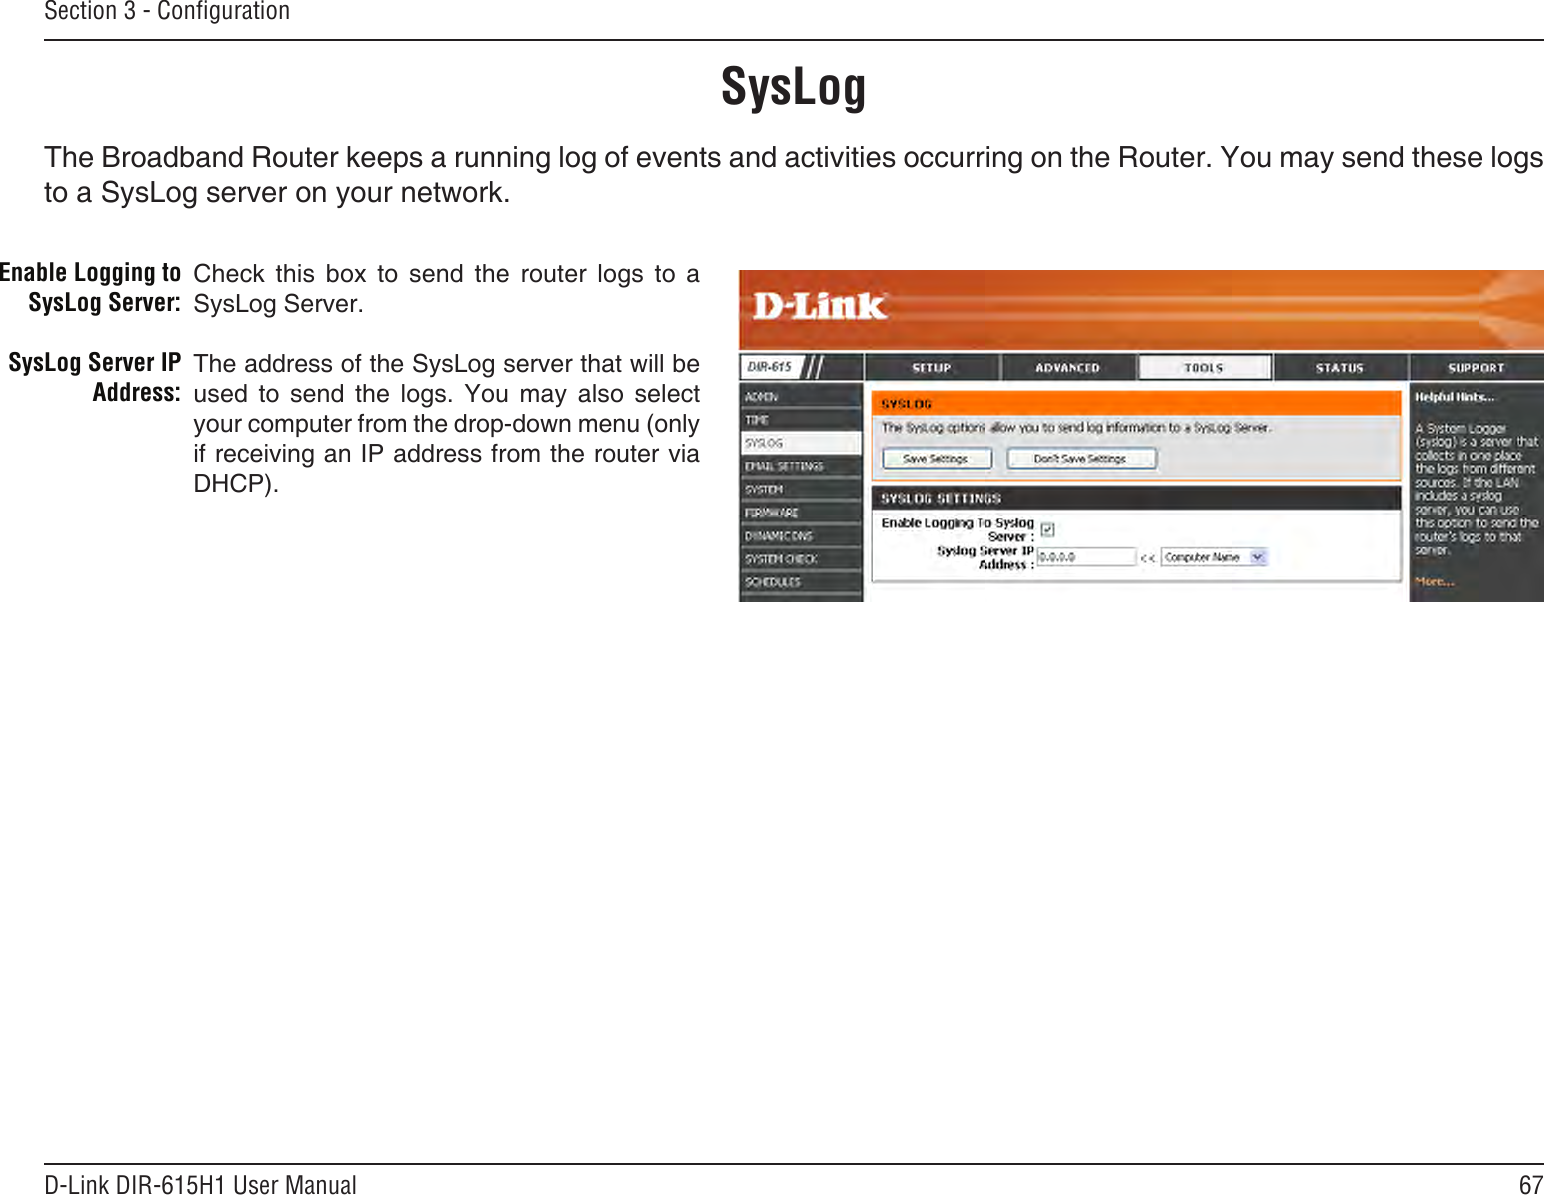 67D-Link DIR-615H1 User ManualSection 3 - CongurationSysLogThe Broadband Router keeps a running log of events and activities occurring on the Router. You may send these logs to a SysLog server on your network.Enable Logging to SysLog Server:SysLog Server IP Address:Check  this  box  to  send  the  router  logs  to  a SysLog Server.The address of the SysLog server that will be used  to  send  the  logs.  You  may  also  select your computer from the drop-down menu (only if receiving an IP address from the router via DHCP).